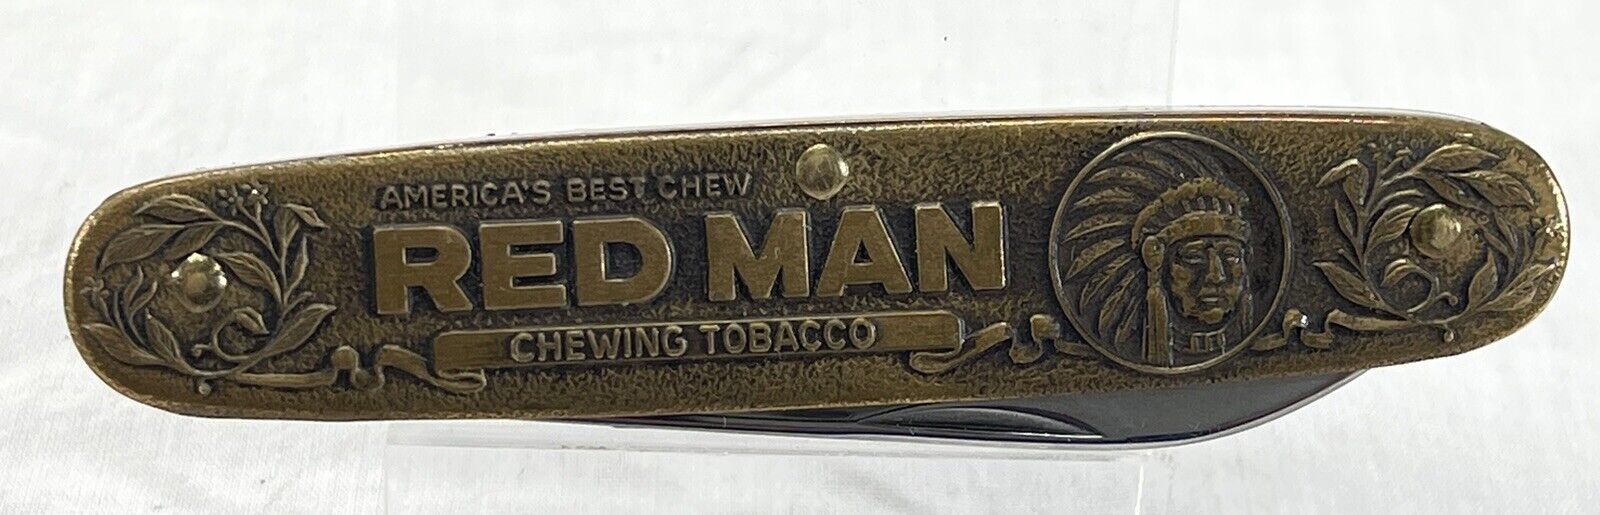 Vintage, Kutmaster, RED MAN Chewing Tobacco Advertisement, Folding Pocket Knife